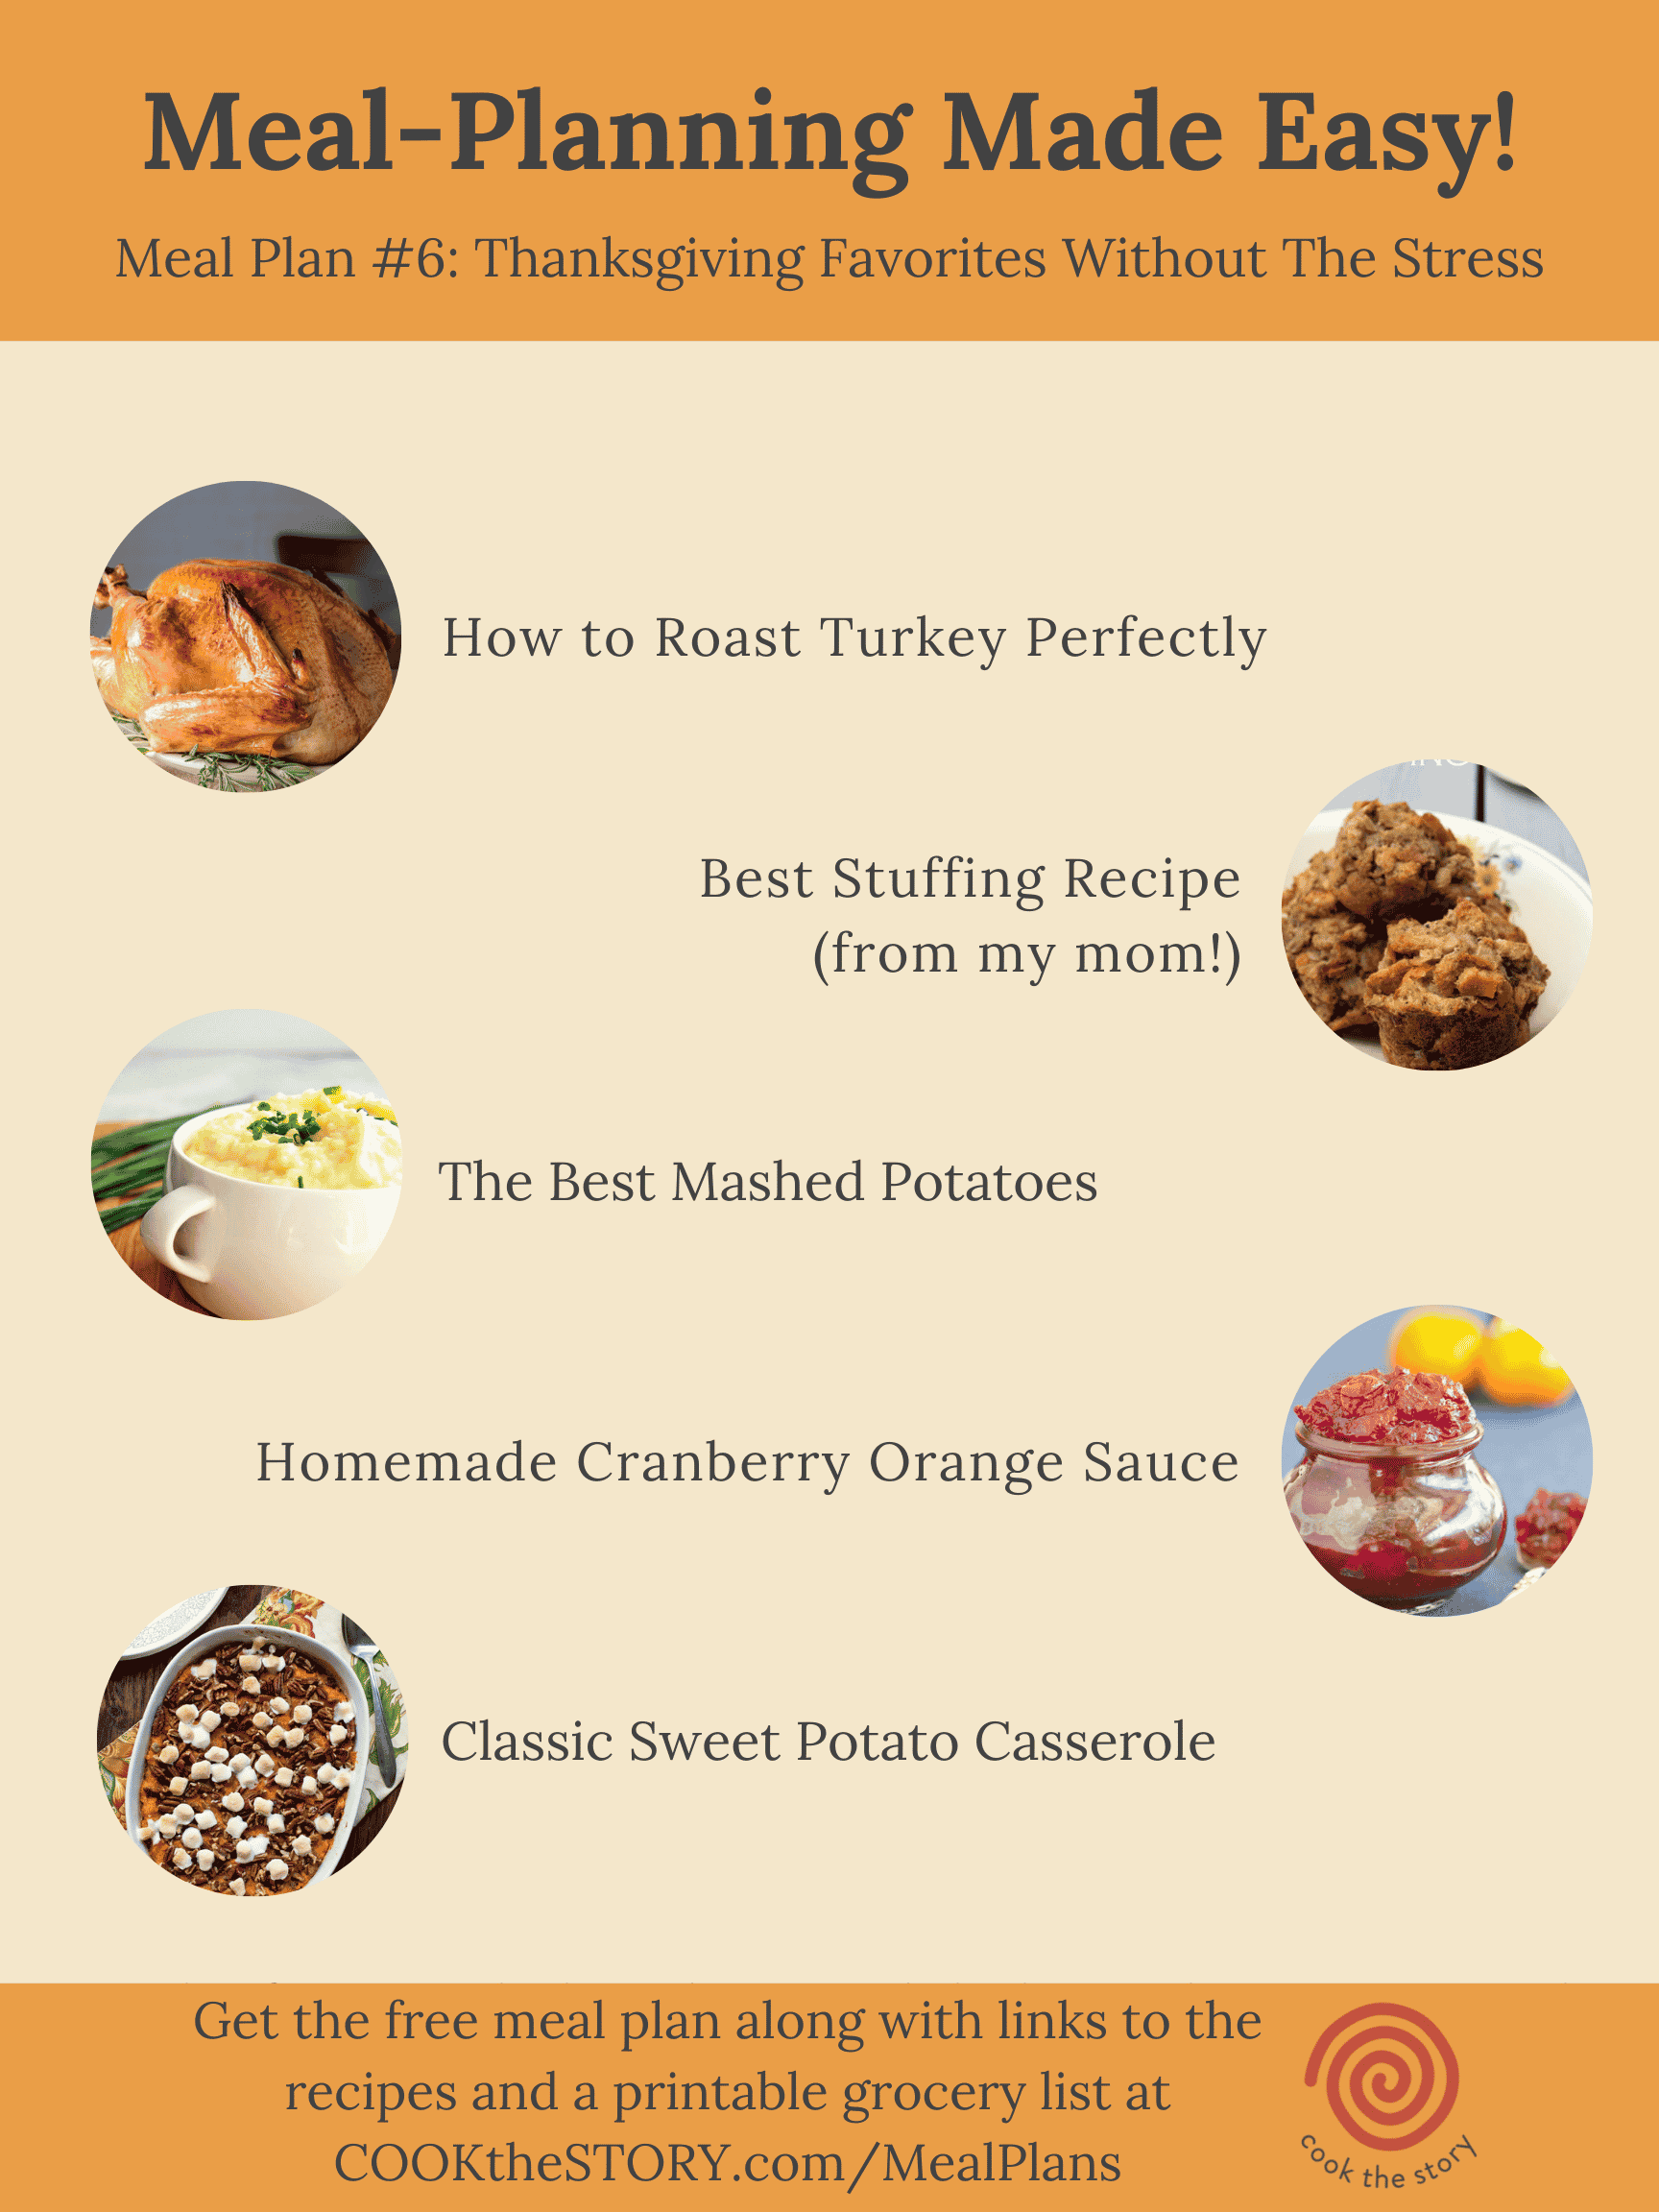 Meal Plan #6: The Thanksgiving Special